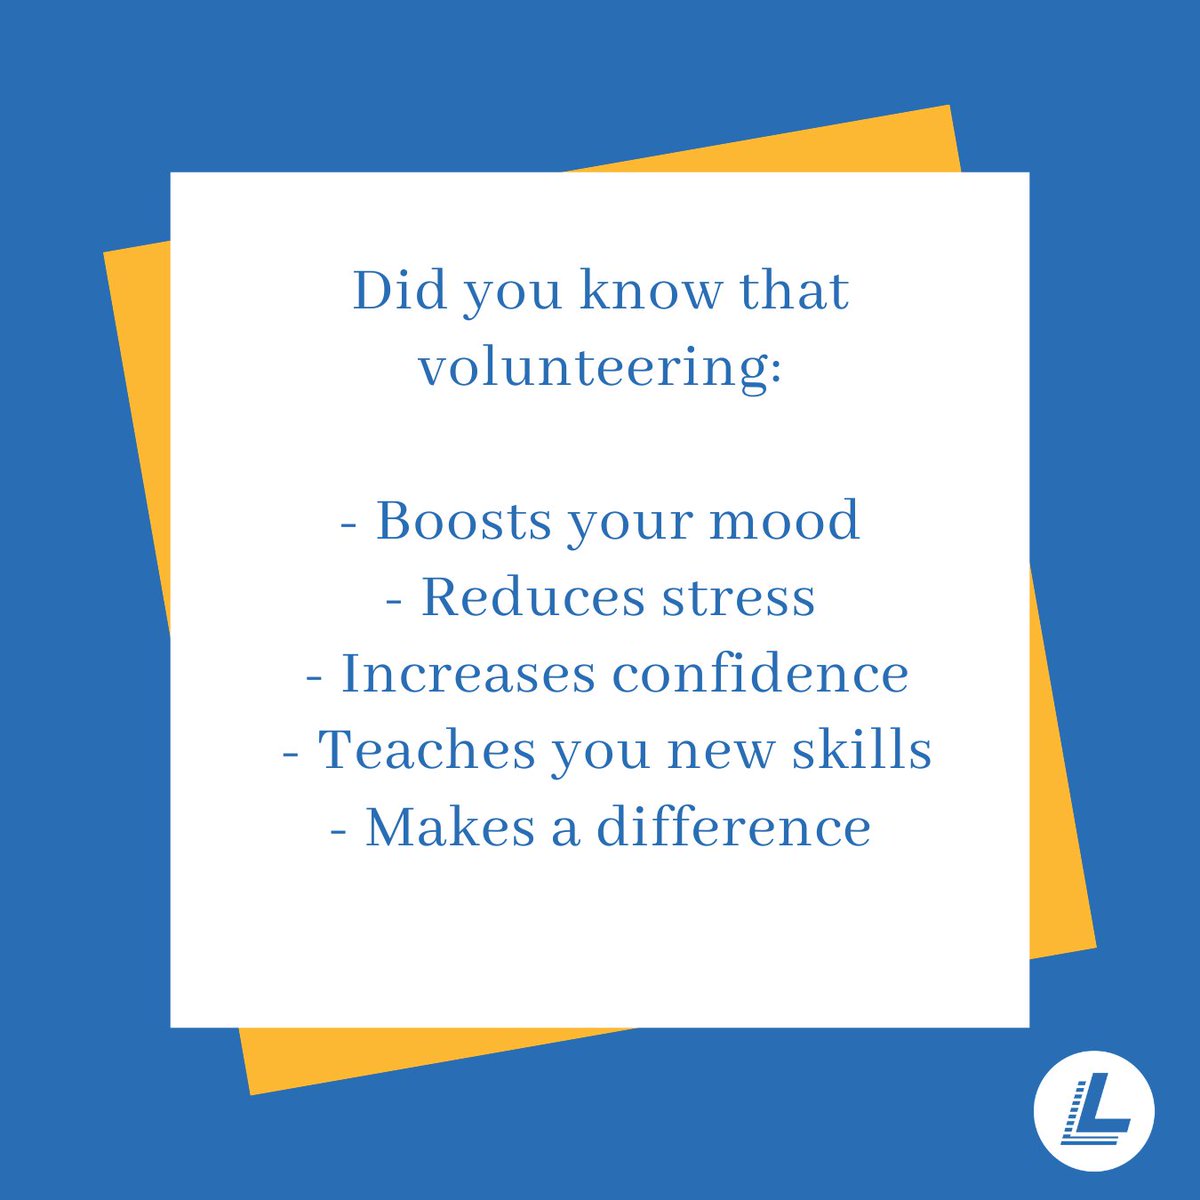 For National Volunteer Month, we are highlighting the benefits of volunteering!
We are forever grateful to those who give their time to volunteer for nonprofits across the world. Thank you all for your support 💛
#VolunteerMonth #BeStrong #NoMoreHospitalGowns #LukesFastBreaks